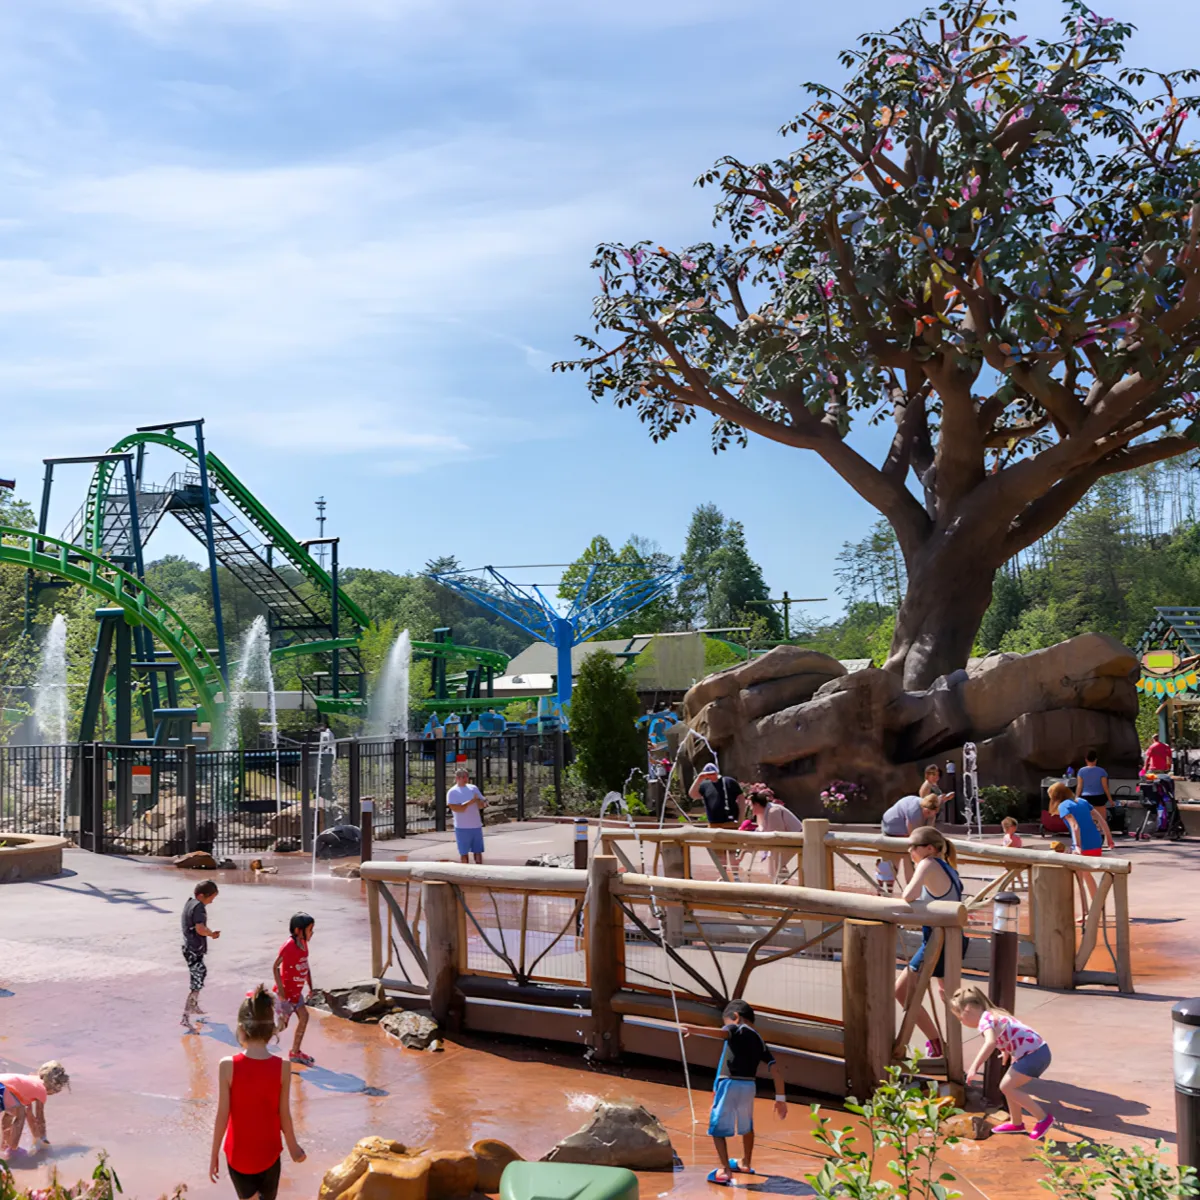 Children's at a splash park in Dollywood with wildwood tree structure